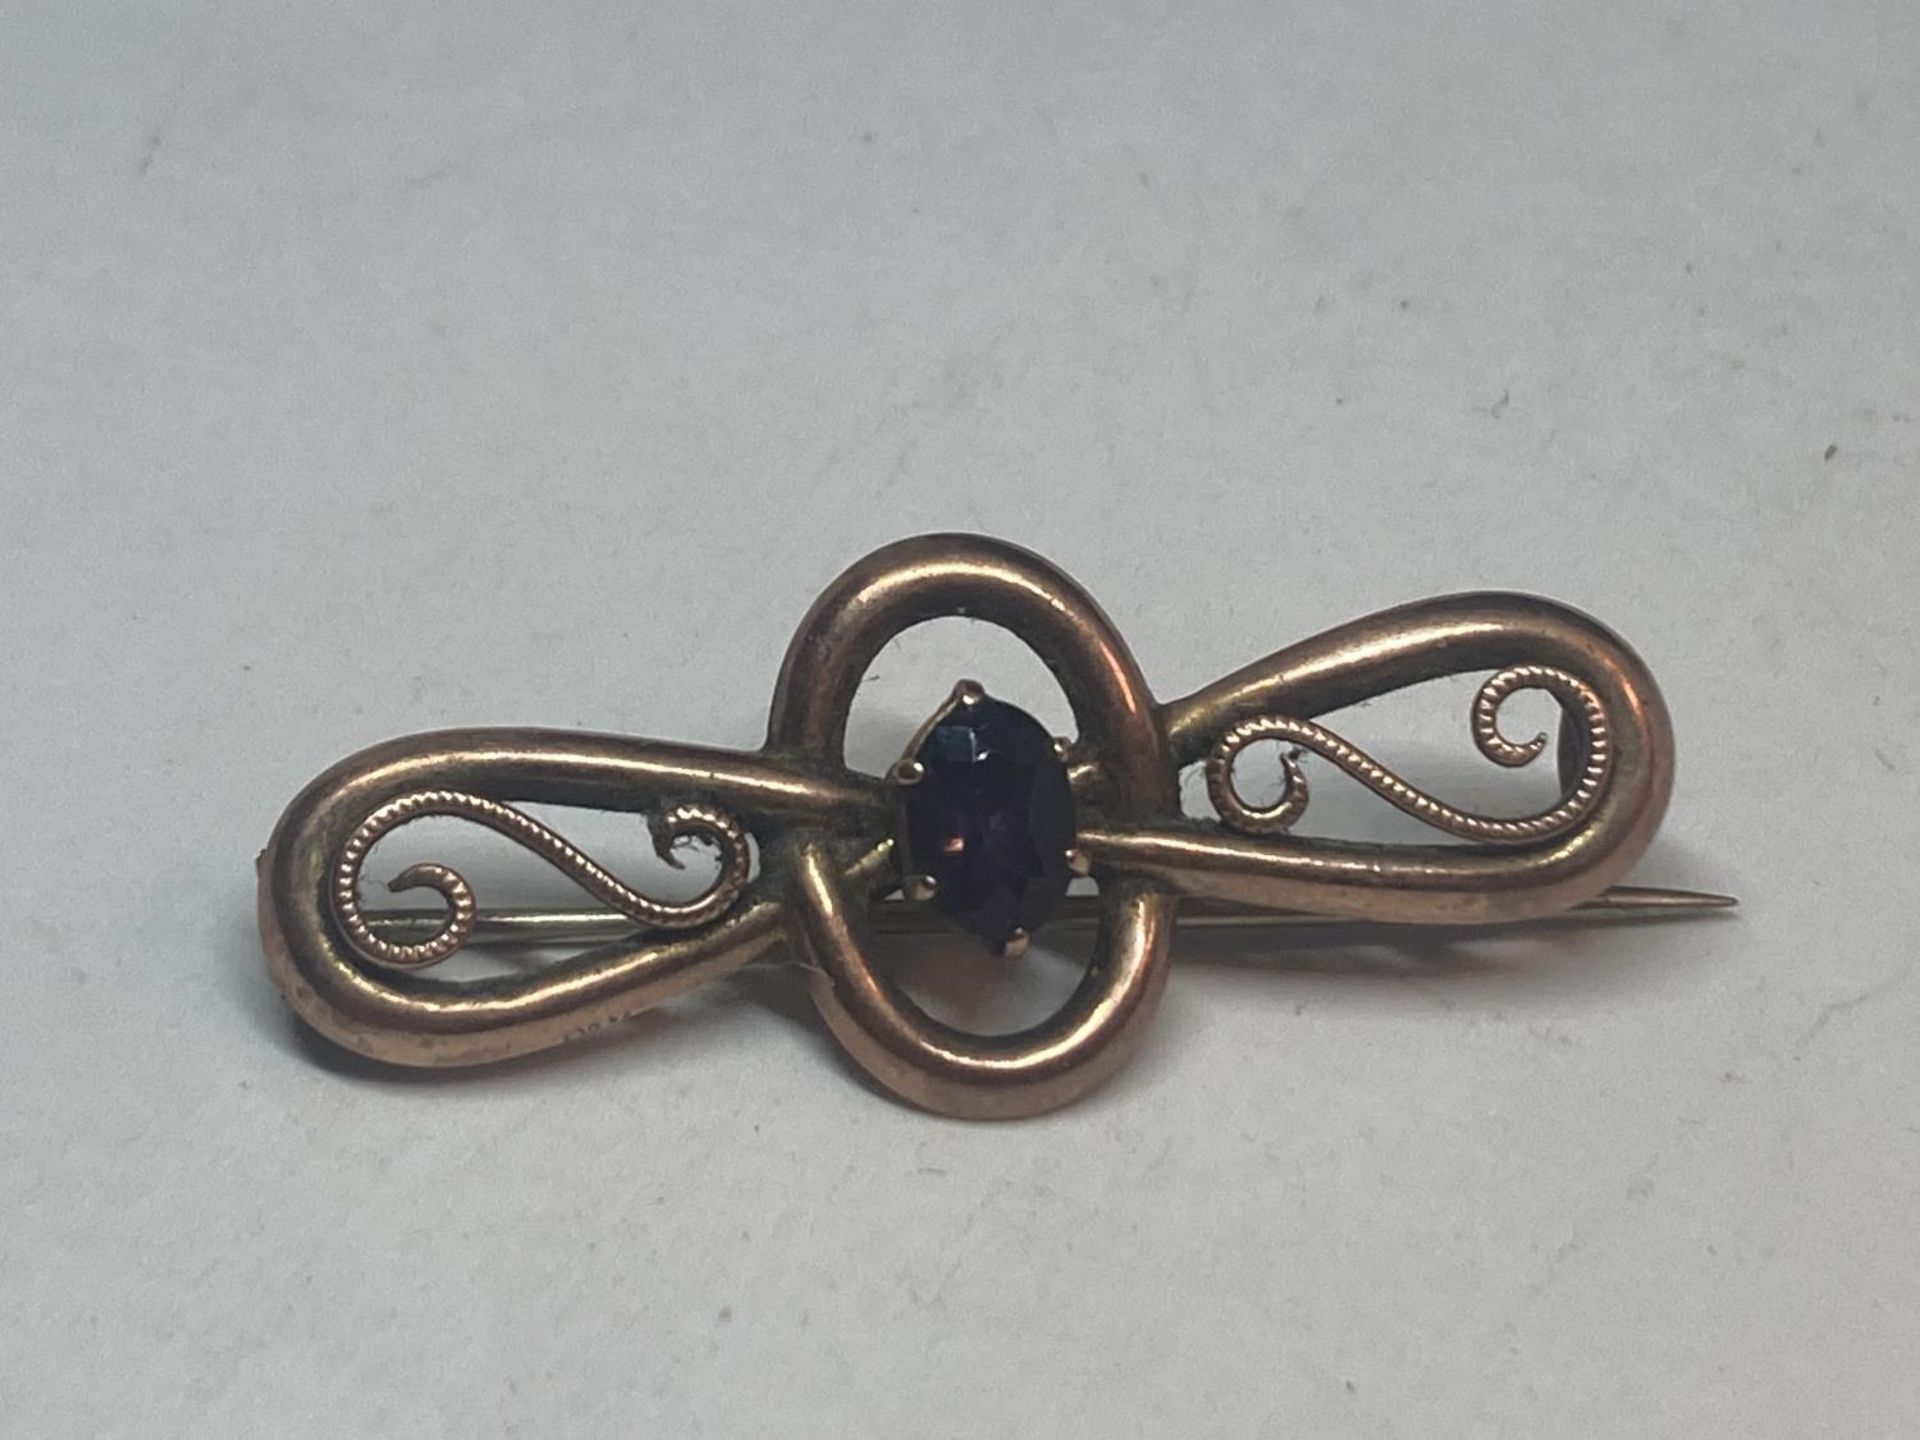 A 9 CARAT GOLD VINTAGE BROOCH WITH A SINGLE PURPLE STONE GROSS WEIGHT 2.05 GRAMS - Image 2 of 10